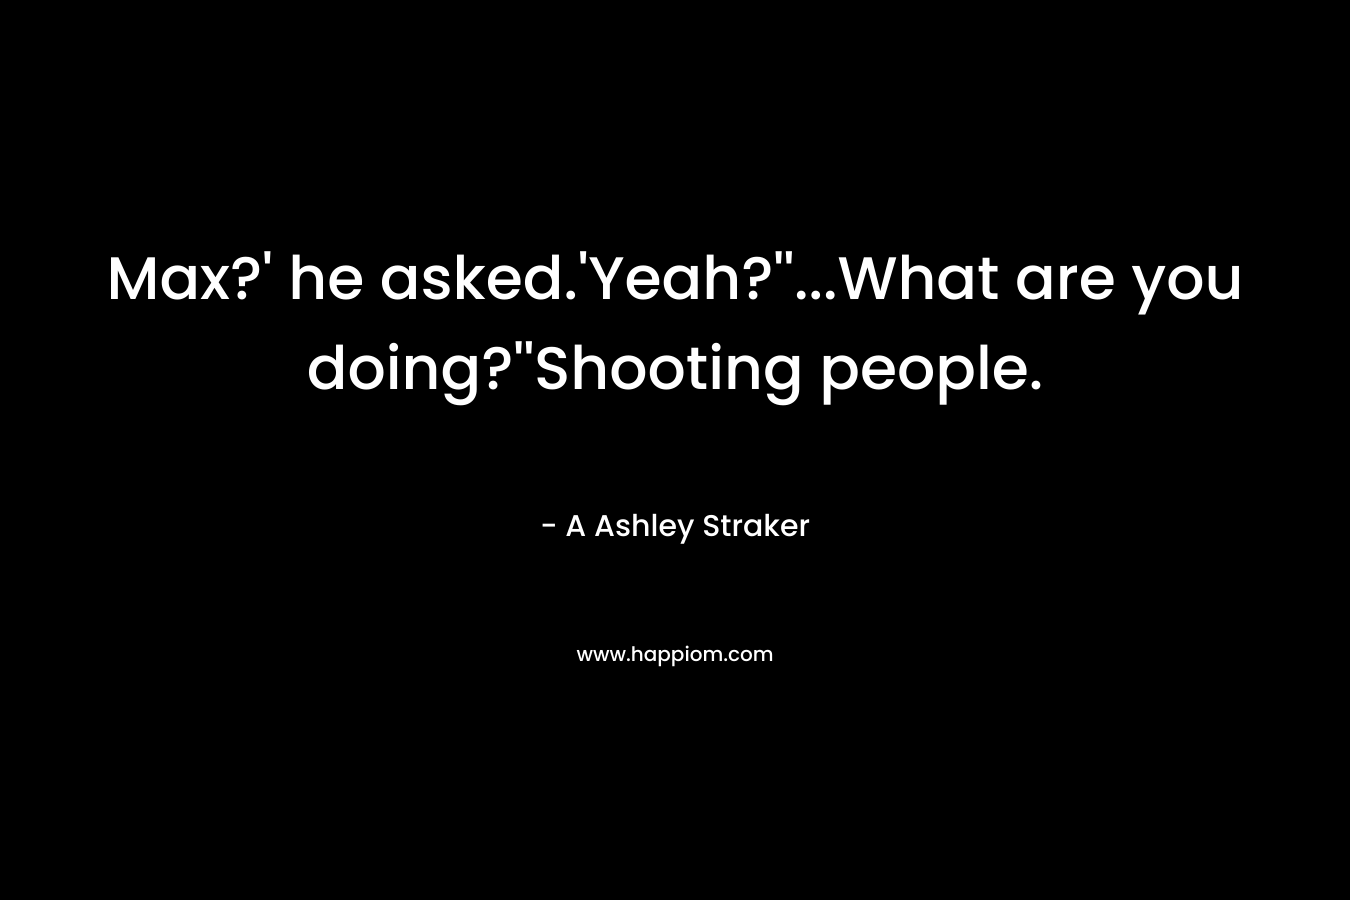 Max?' he asked.'Yeah?''...What are you doing?''Shooting people.